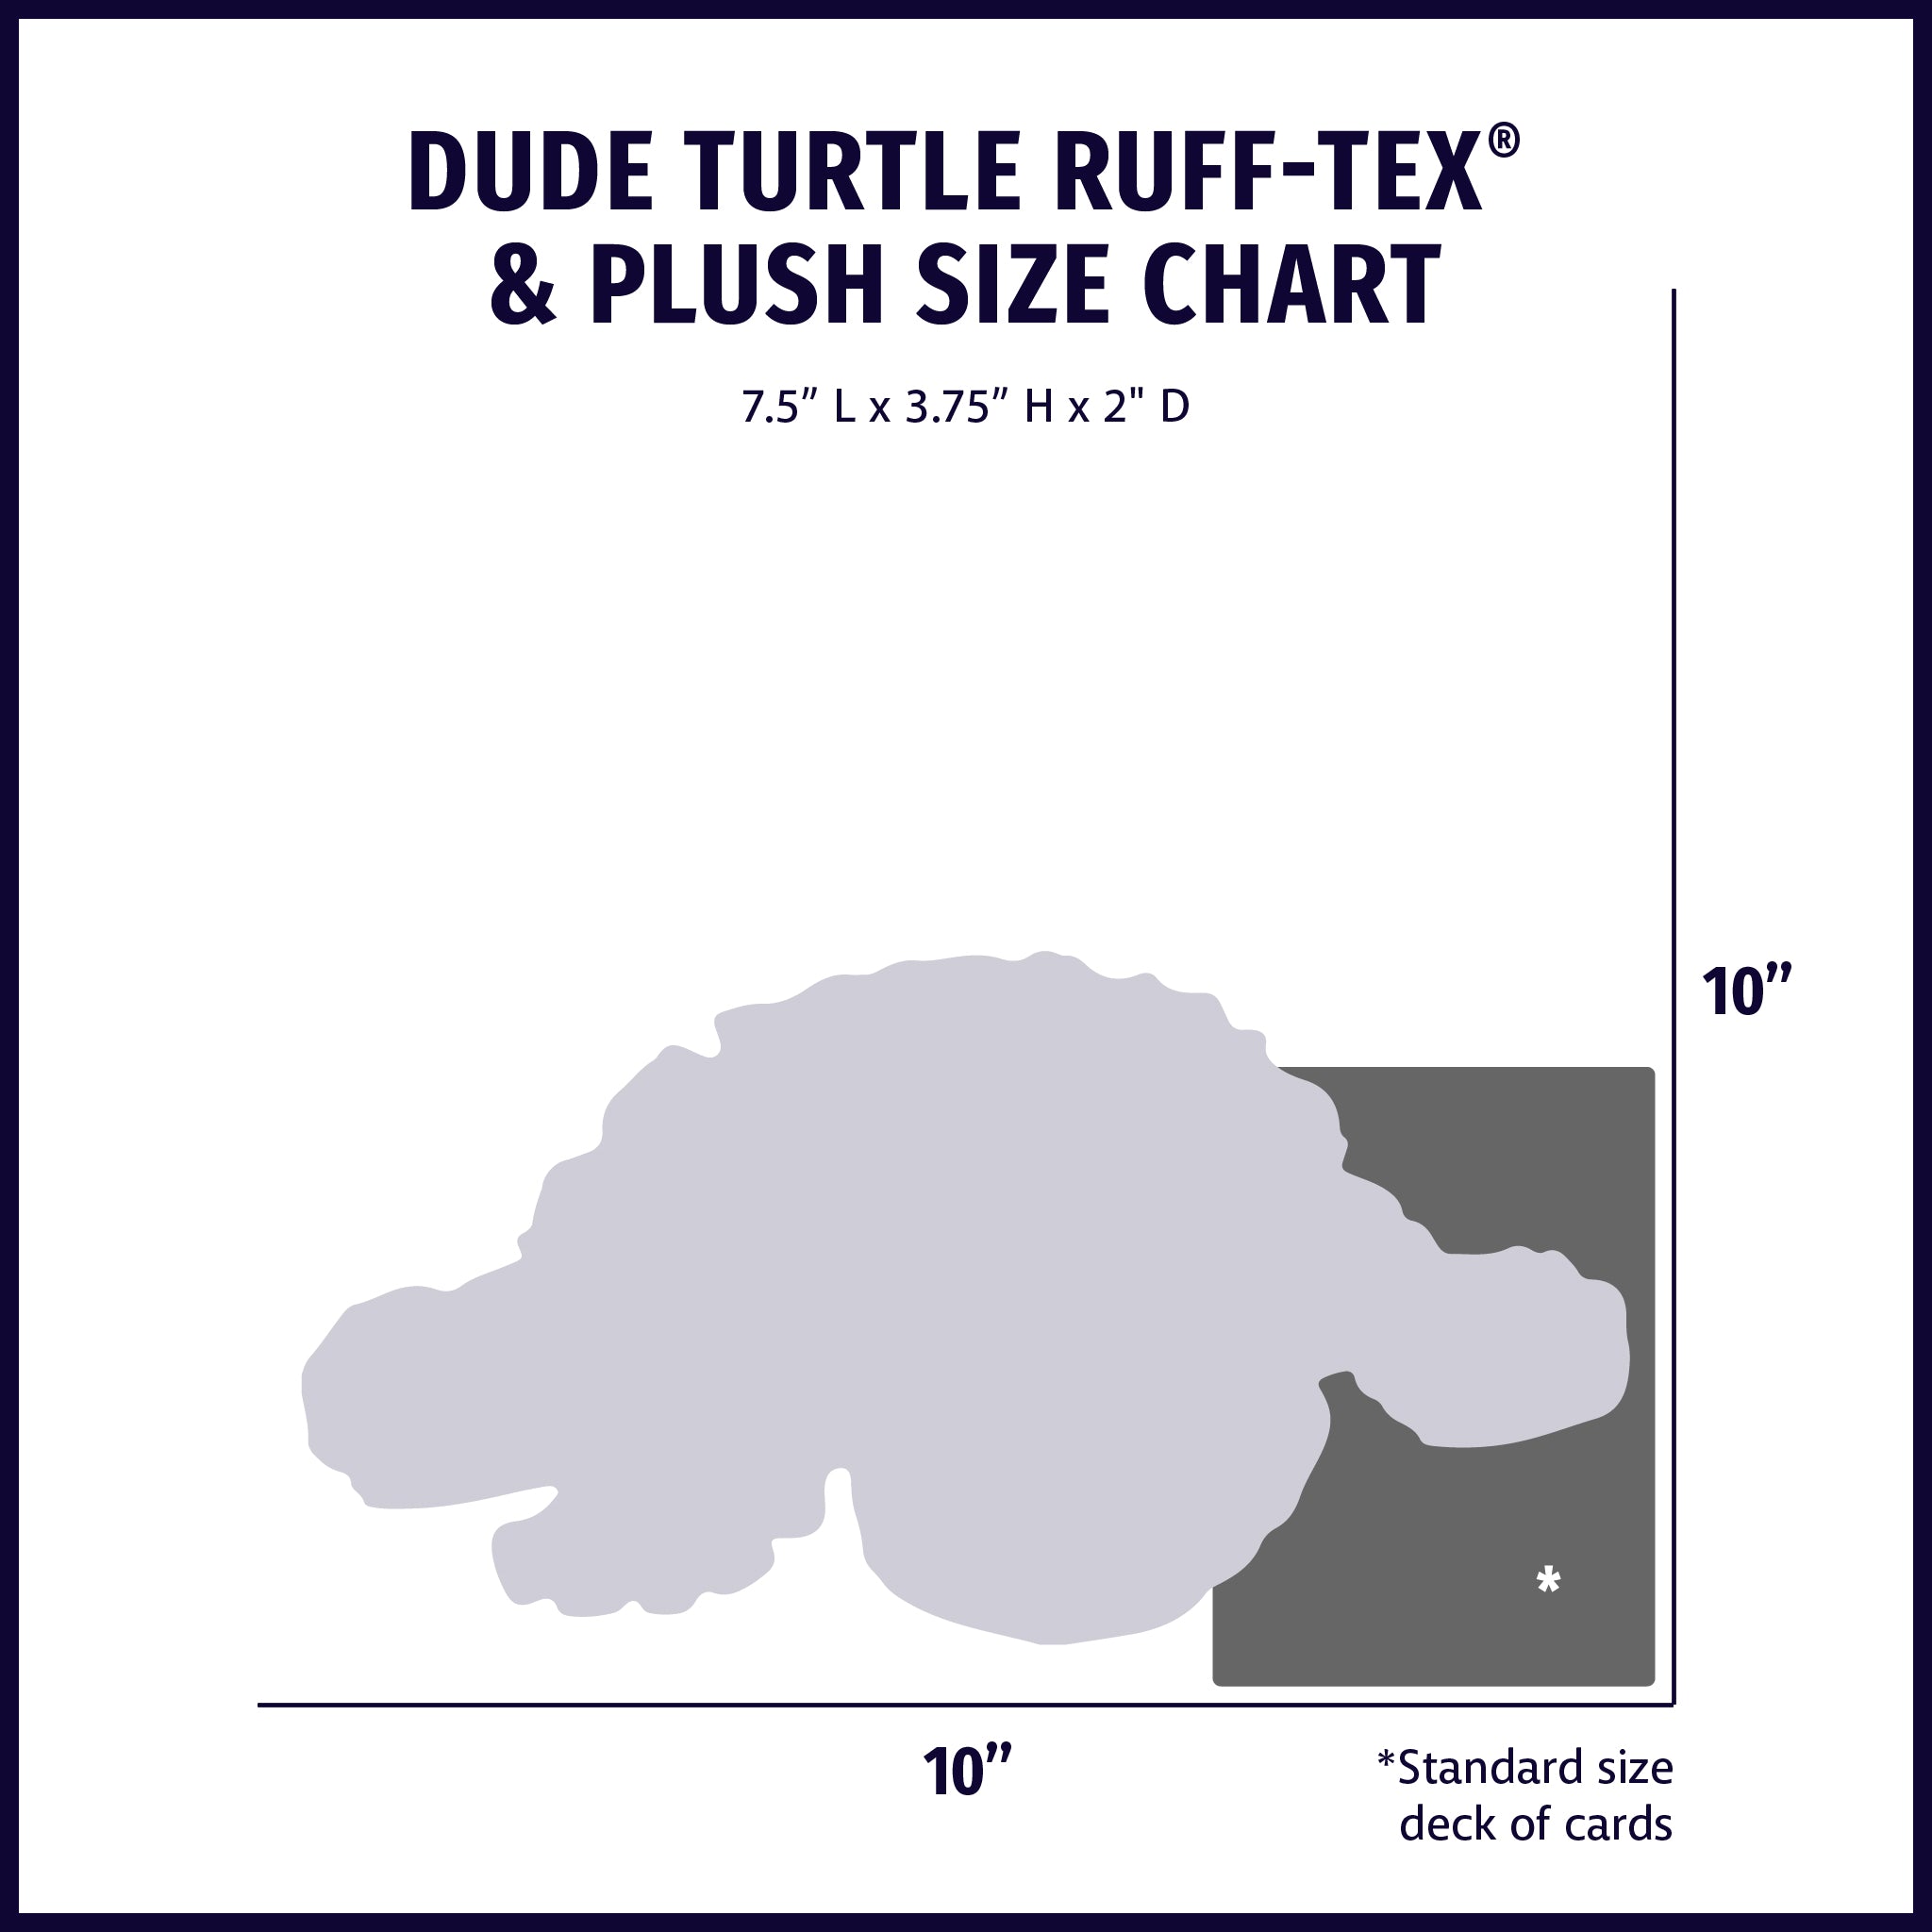 Size chart displaying Dude Turtle HuggleFusion® plush and latex dog toy silhouette with approximate dimensions compared to standard size deck of cards.